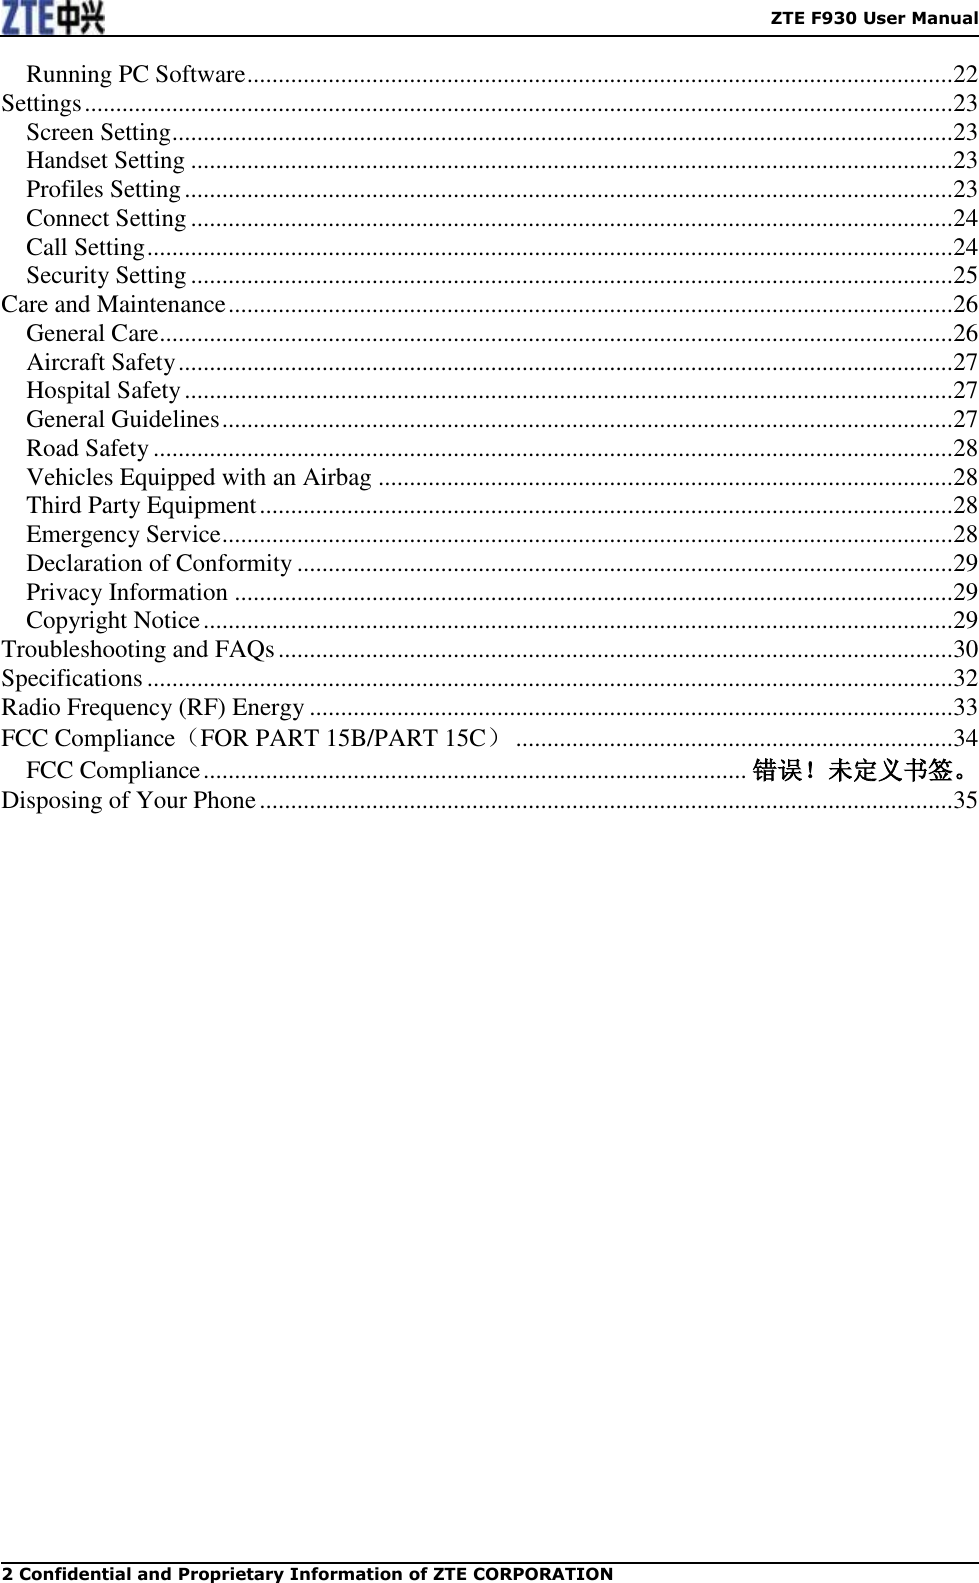    ZTE F930 User Manual 2 Confidential and Proprietary Information of ZTE CORPORATION Running PC Software ................................................................................................................. 22 Settings ........................................................................................................................................... 23 Screen Setting ............................................................................................................................. 23 Handset Setting .......................................................................................................................... 23 Profiles Setting ........................................................................................................................... 23 Connect Setting .......................................................................................................................... 24 Call Setting ................................................................................................................................. 24 Security Setting .......................................................................................................................... 25 Care and Maintenance .................................................................................................................... 26 General Care ............................................................................................................................... 26 Aircraft Safety ............................................................................................................................ 27 Hospital Safety ........................................................................................................................... 27 General Guidelines ..................................................................................................................... 27 Road Safety ................................................................................................................................ 28 Vehicles Equipped with an Airbag ............................................................................................ 28 Third Party Equipment ............................................................................................................... 28 Emergency Service ..................................................................................................................... 28 Declaration of Conformity ......................................................................................................... 29 Privacy Information ................................................................................................................... 29 Copyright Notice ........................................................................................................................ 29 Troubleshooting and FAQs ............................................................................................................ 30 Specifications ................................................................................................................................. 32 Radio Frequency (RF) Energy ....................................................................................................... 33 FCC Compliance（FOR PART 15B/PART 15C） ...................................................................... 34 FCC Compliance ....................................................................................... 错误！未定义书签。 Disposing of Your Phone ............................................................................................................... 35 